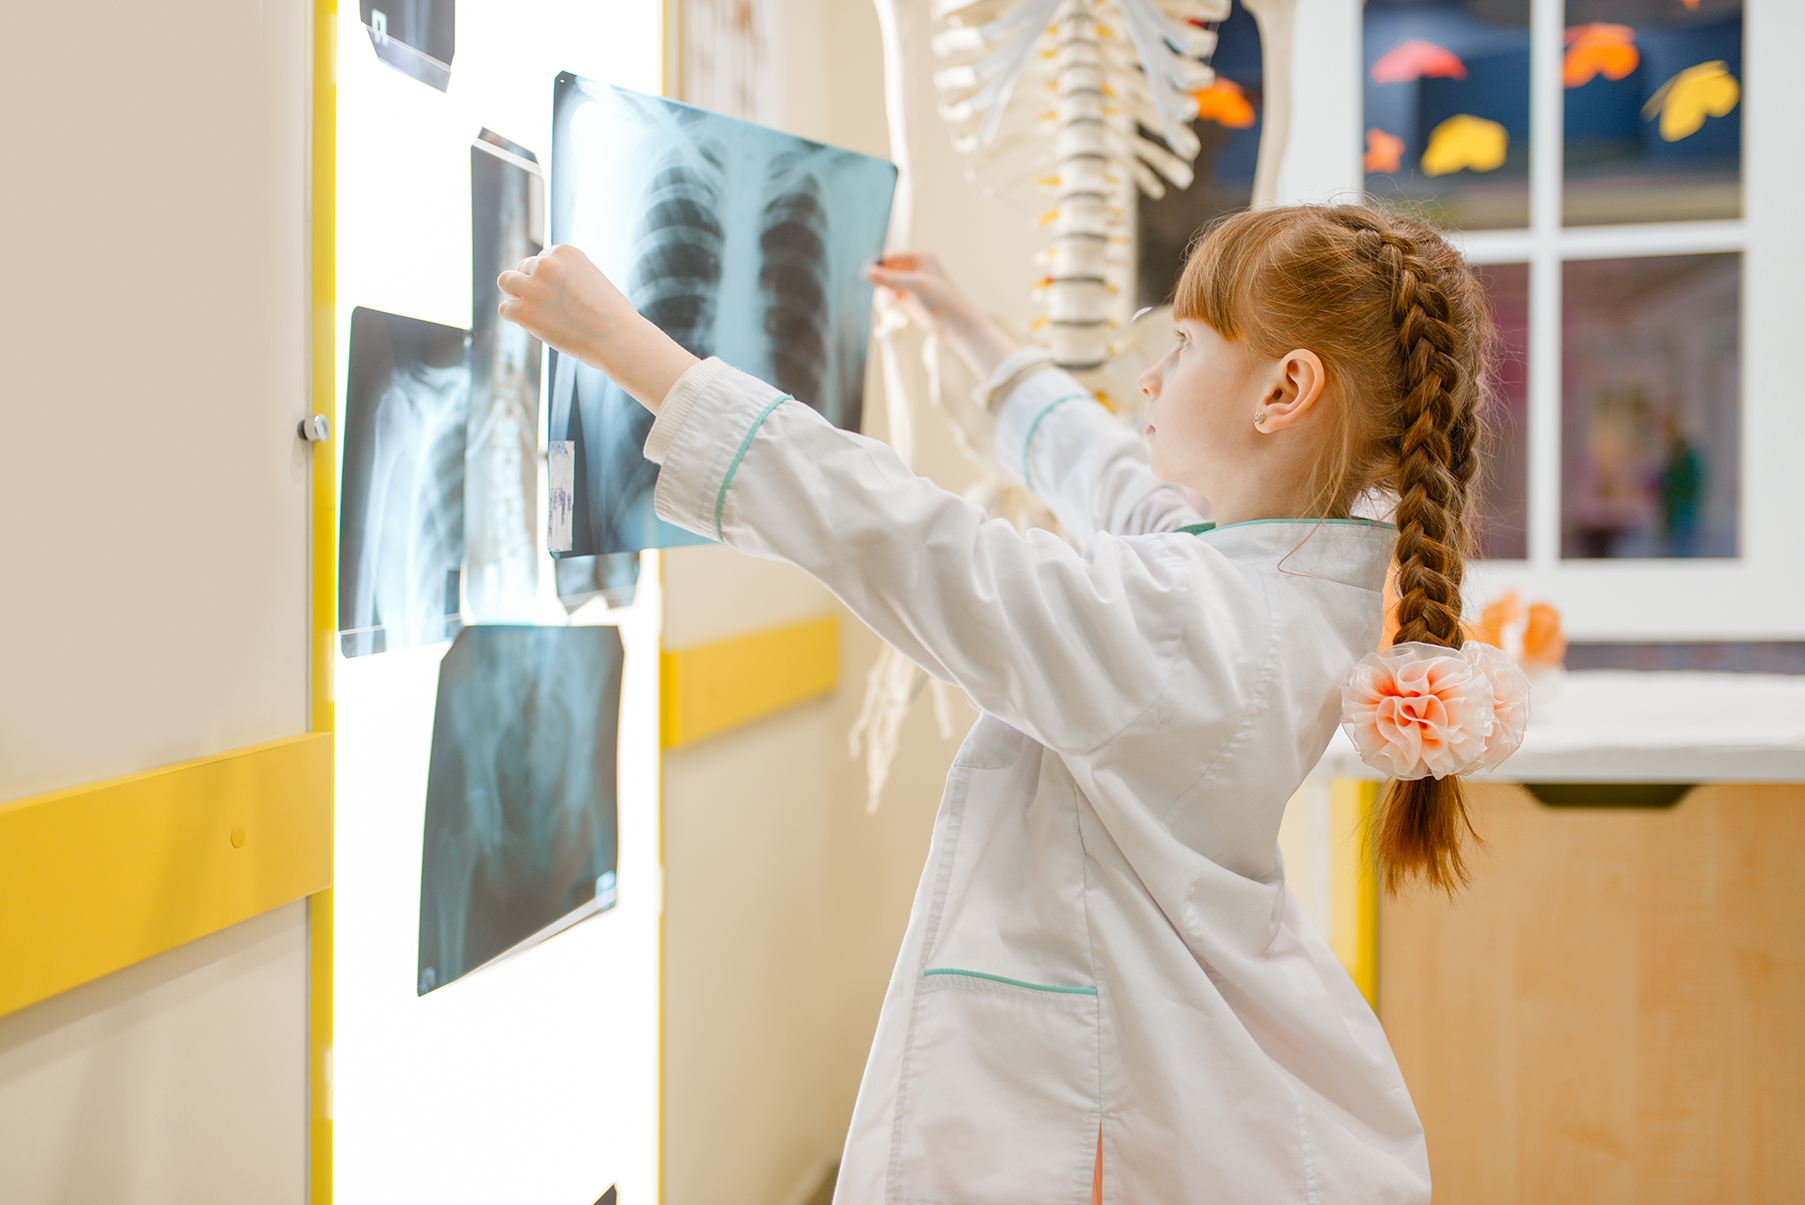 Little girl in uniform looks at the x-ray, doctor